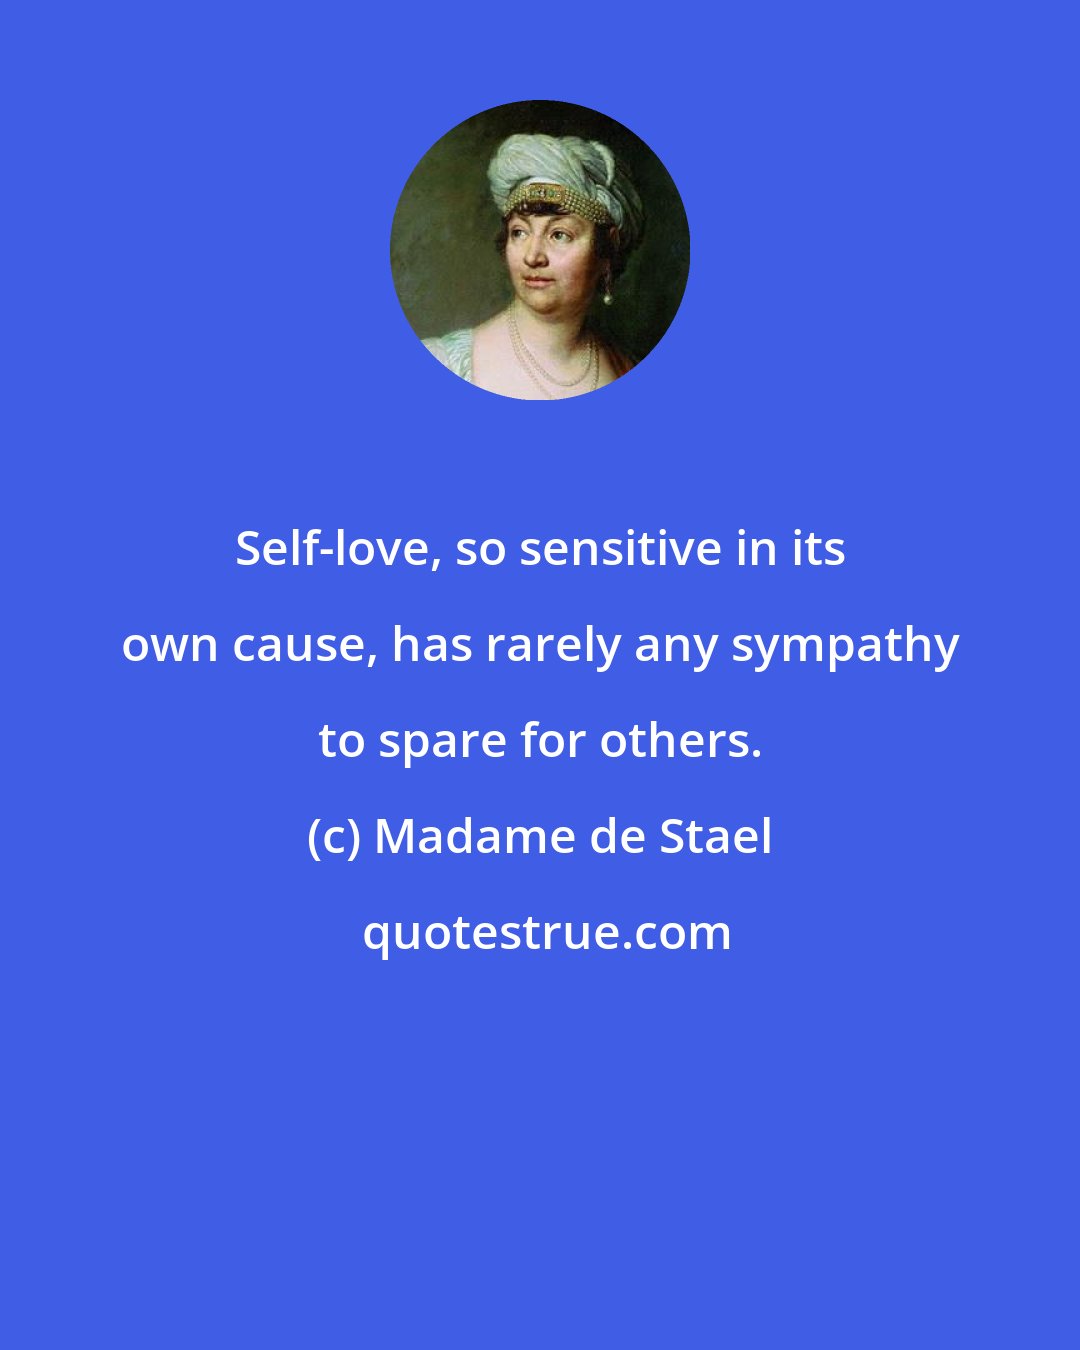 Madame de Stael: Self-love, so sensitive in its own cause, has rarely any sympathy to spare for others.